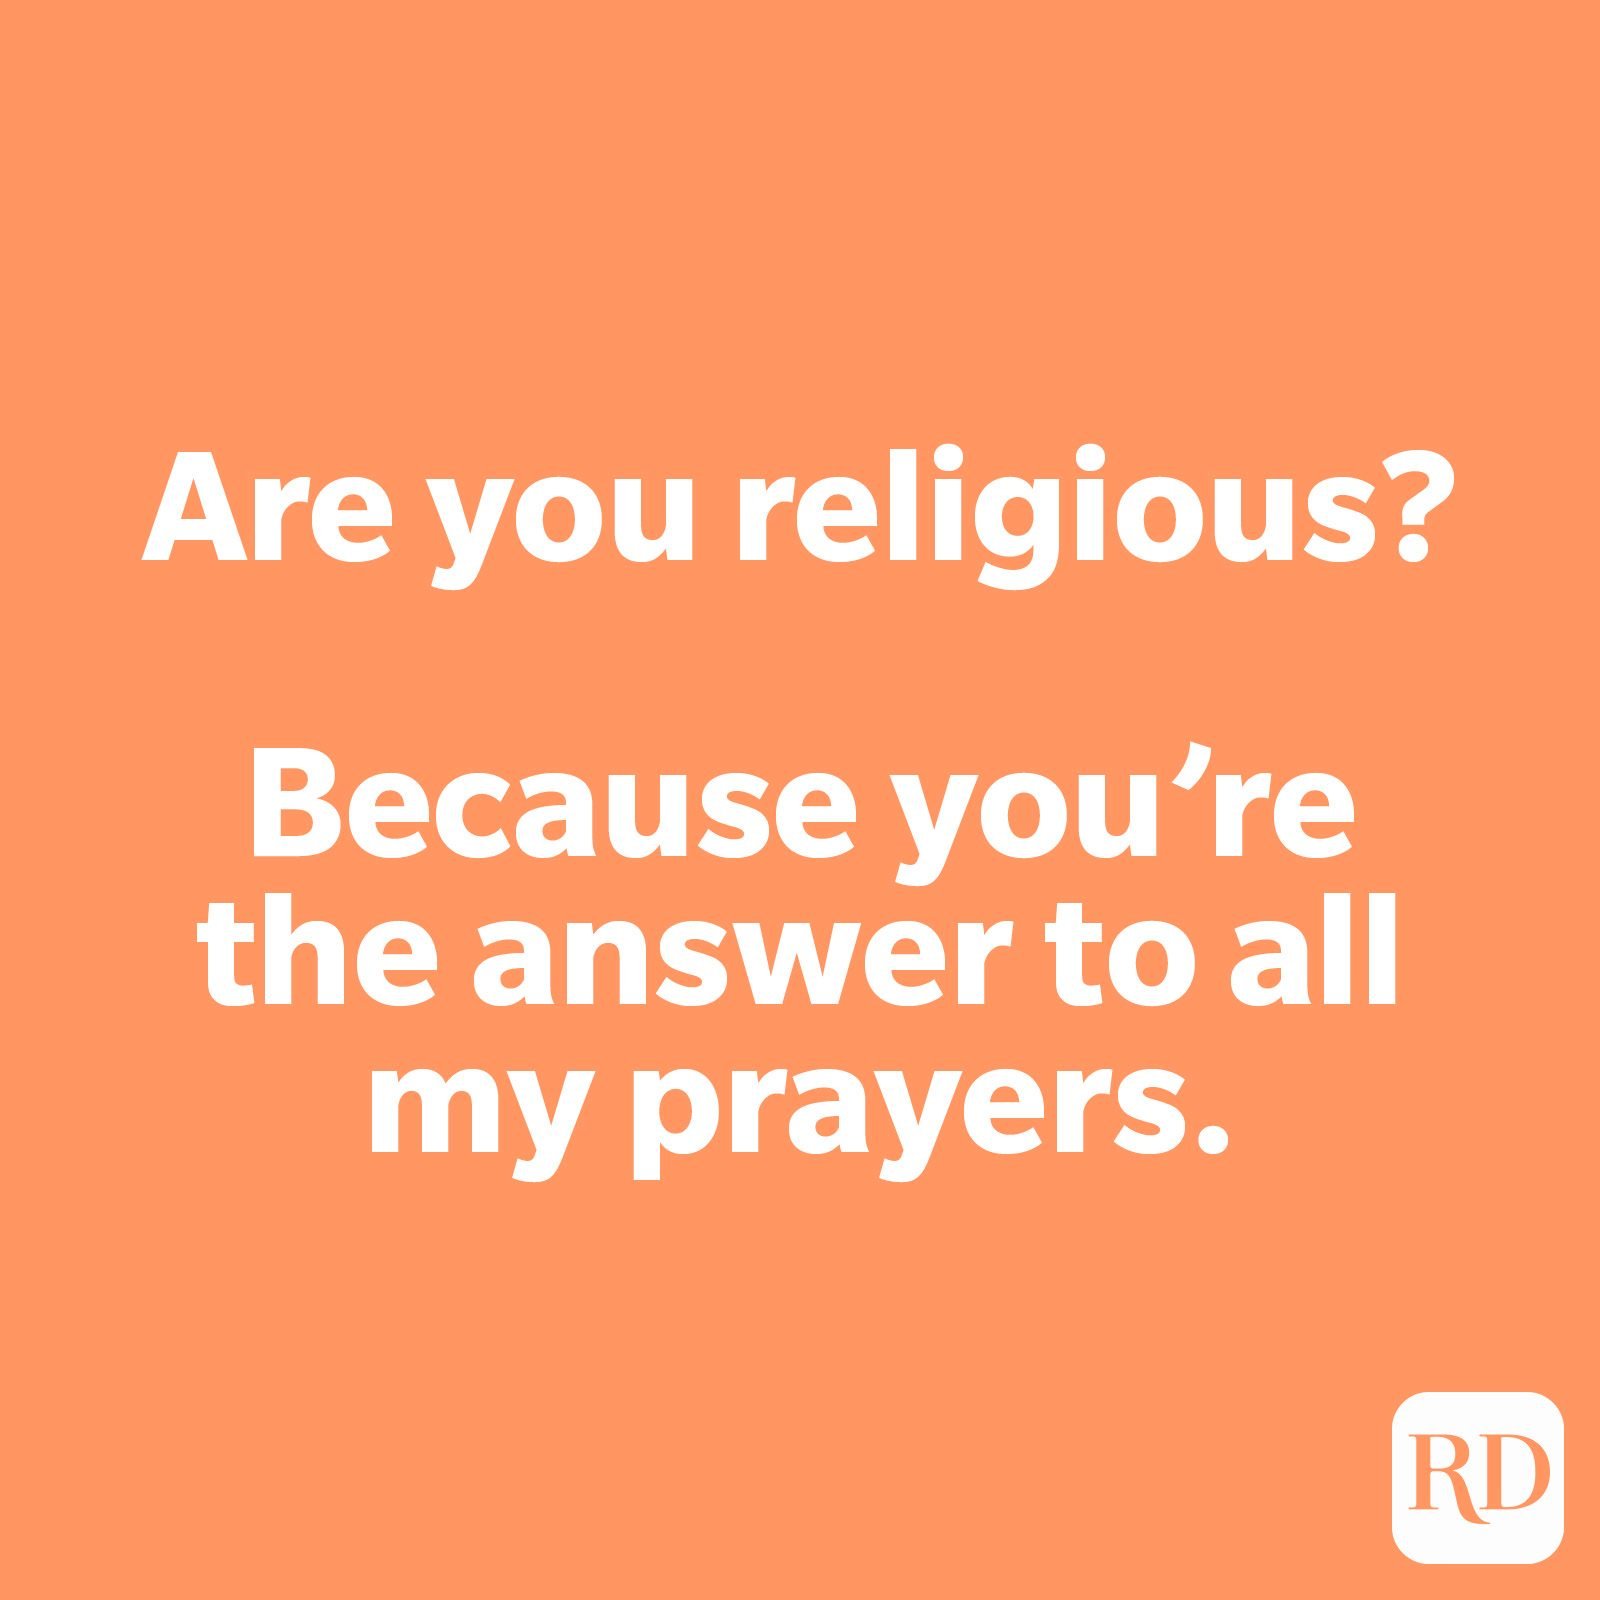 Are you religious? Because you’re the answer to all my prayers.